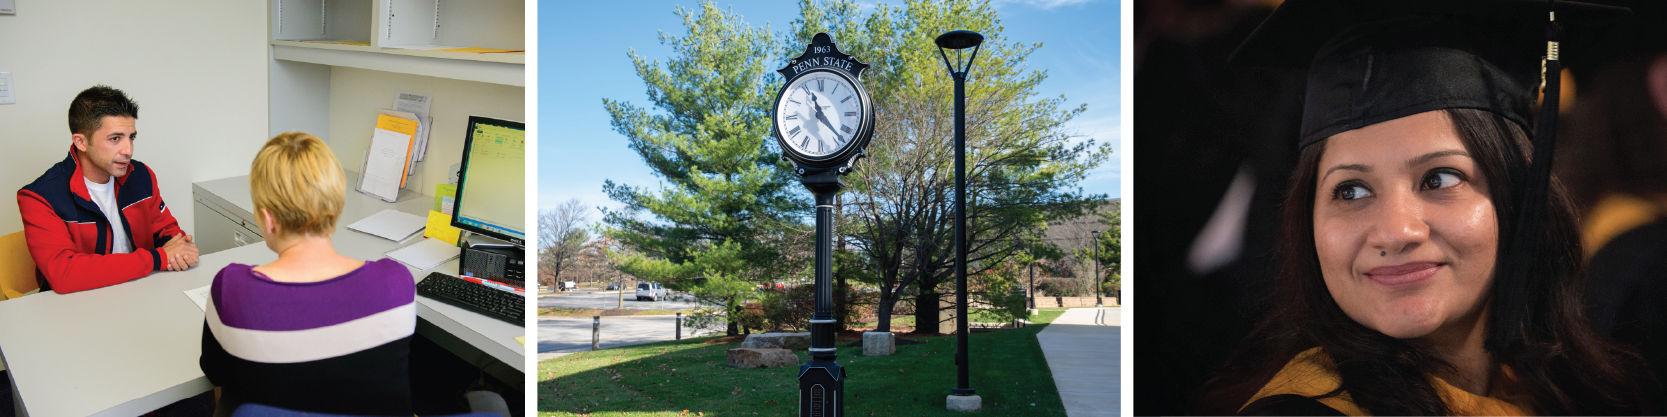 Collage of campus photos: A man sitting at a table talking to a woman, the outdoor campus clock in front of trees, and a woman smiling at commencement.